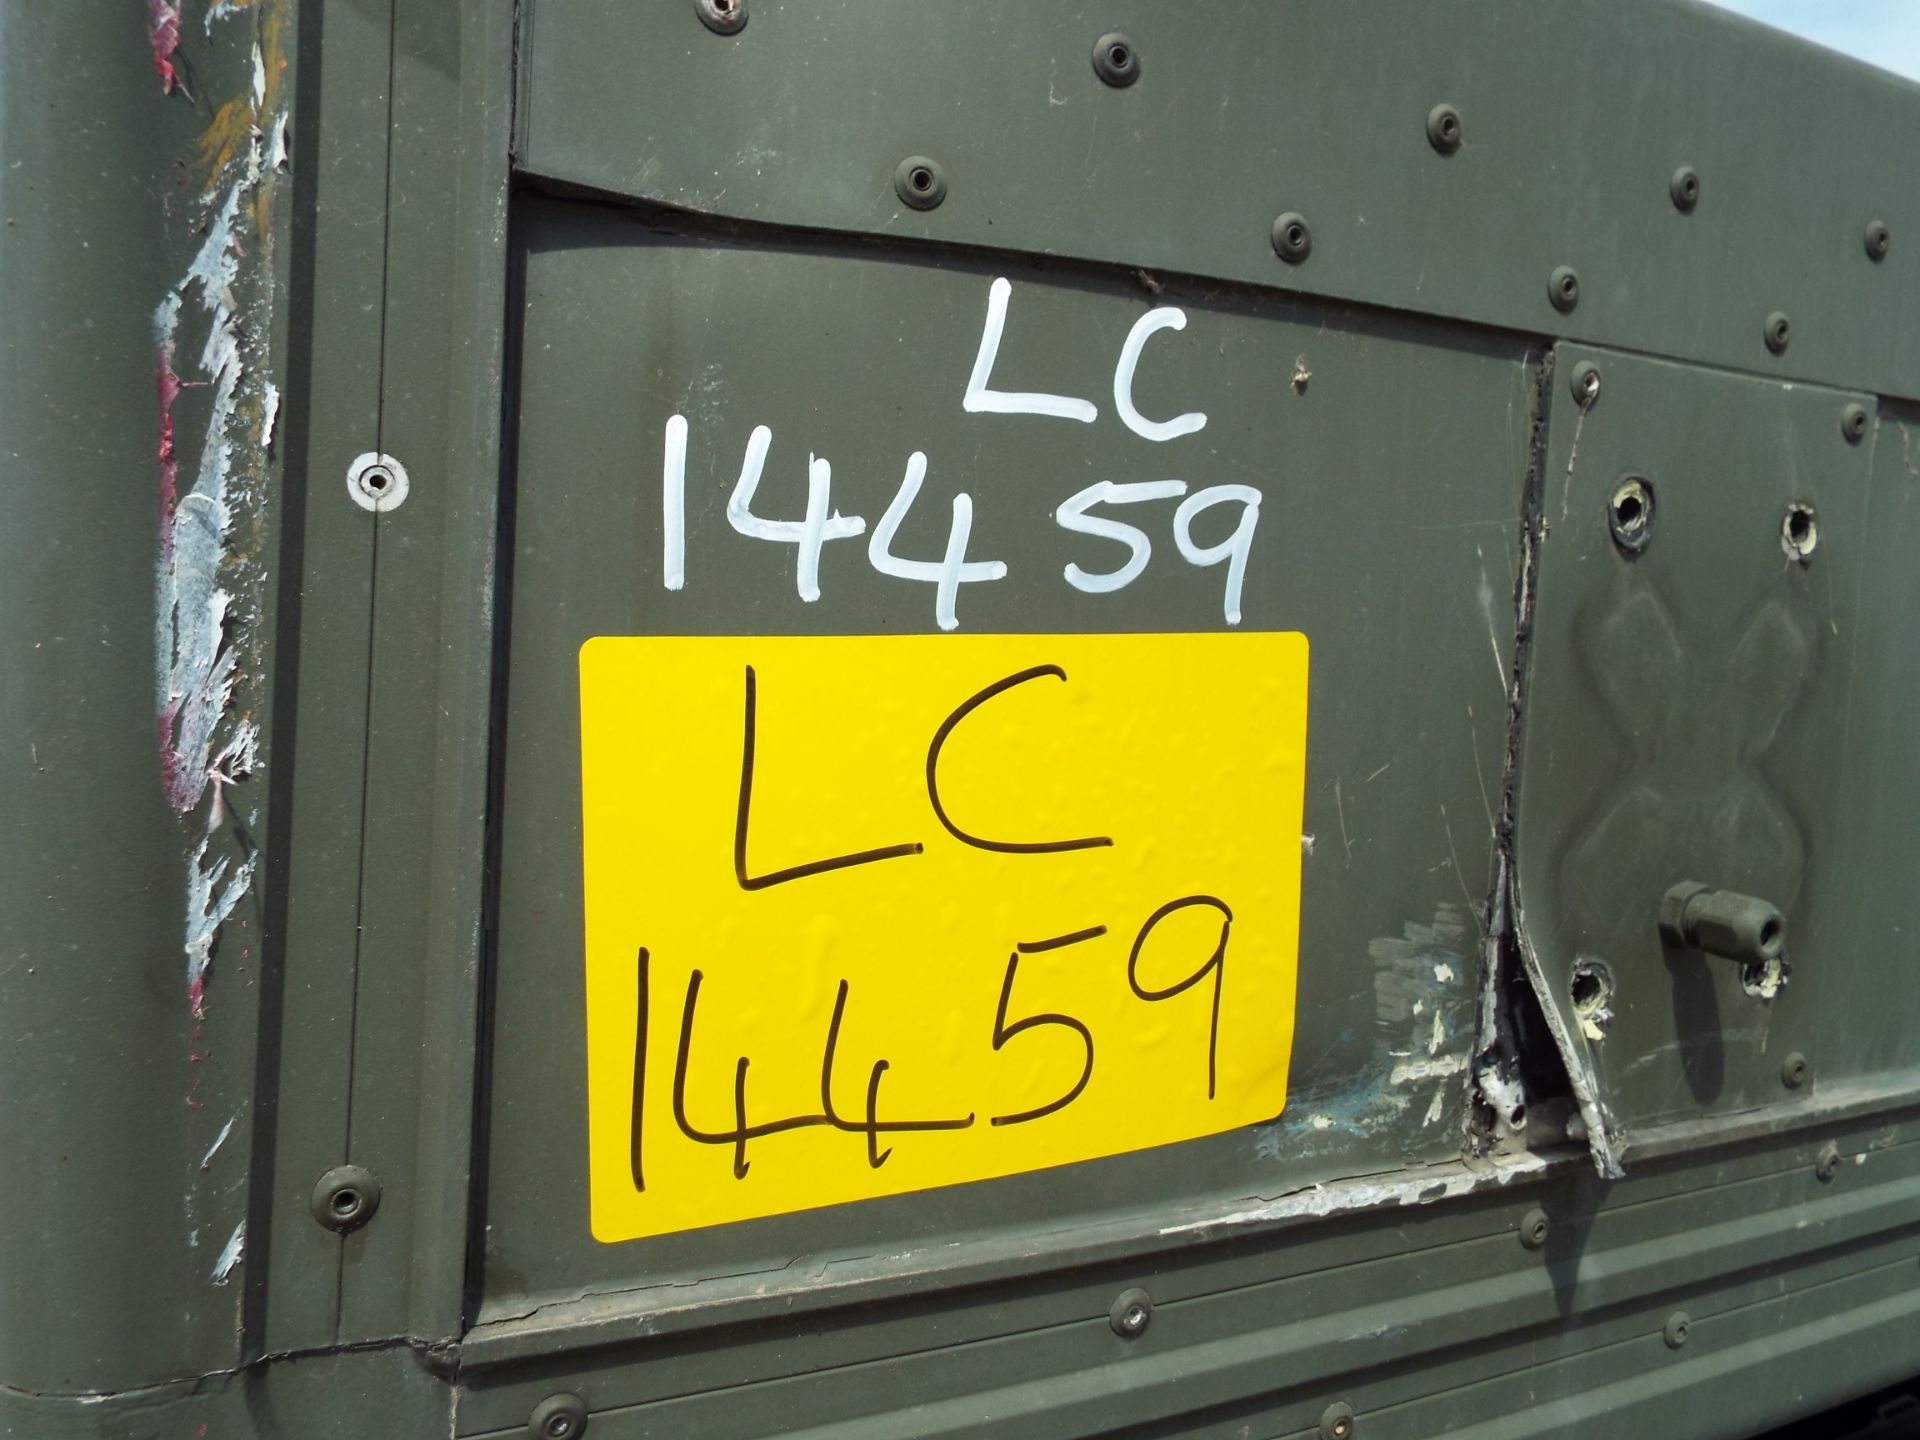 Military Specification Land Rover Wolf 130 Ambulance - Image 20 of 20